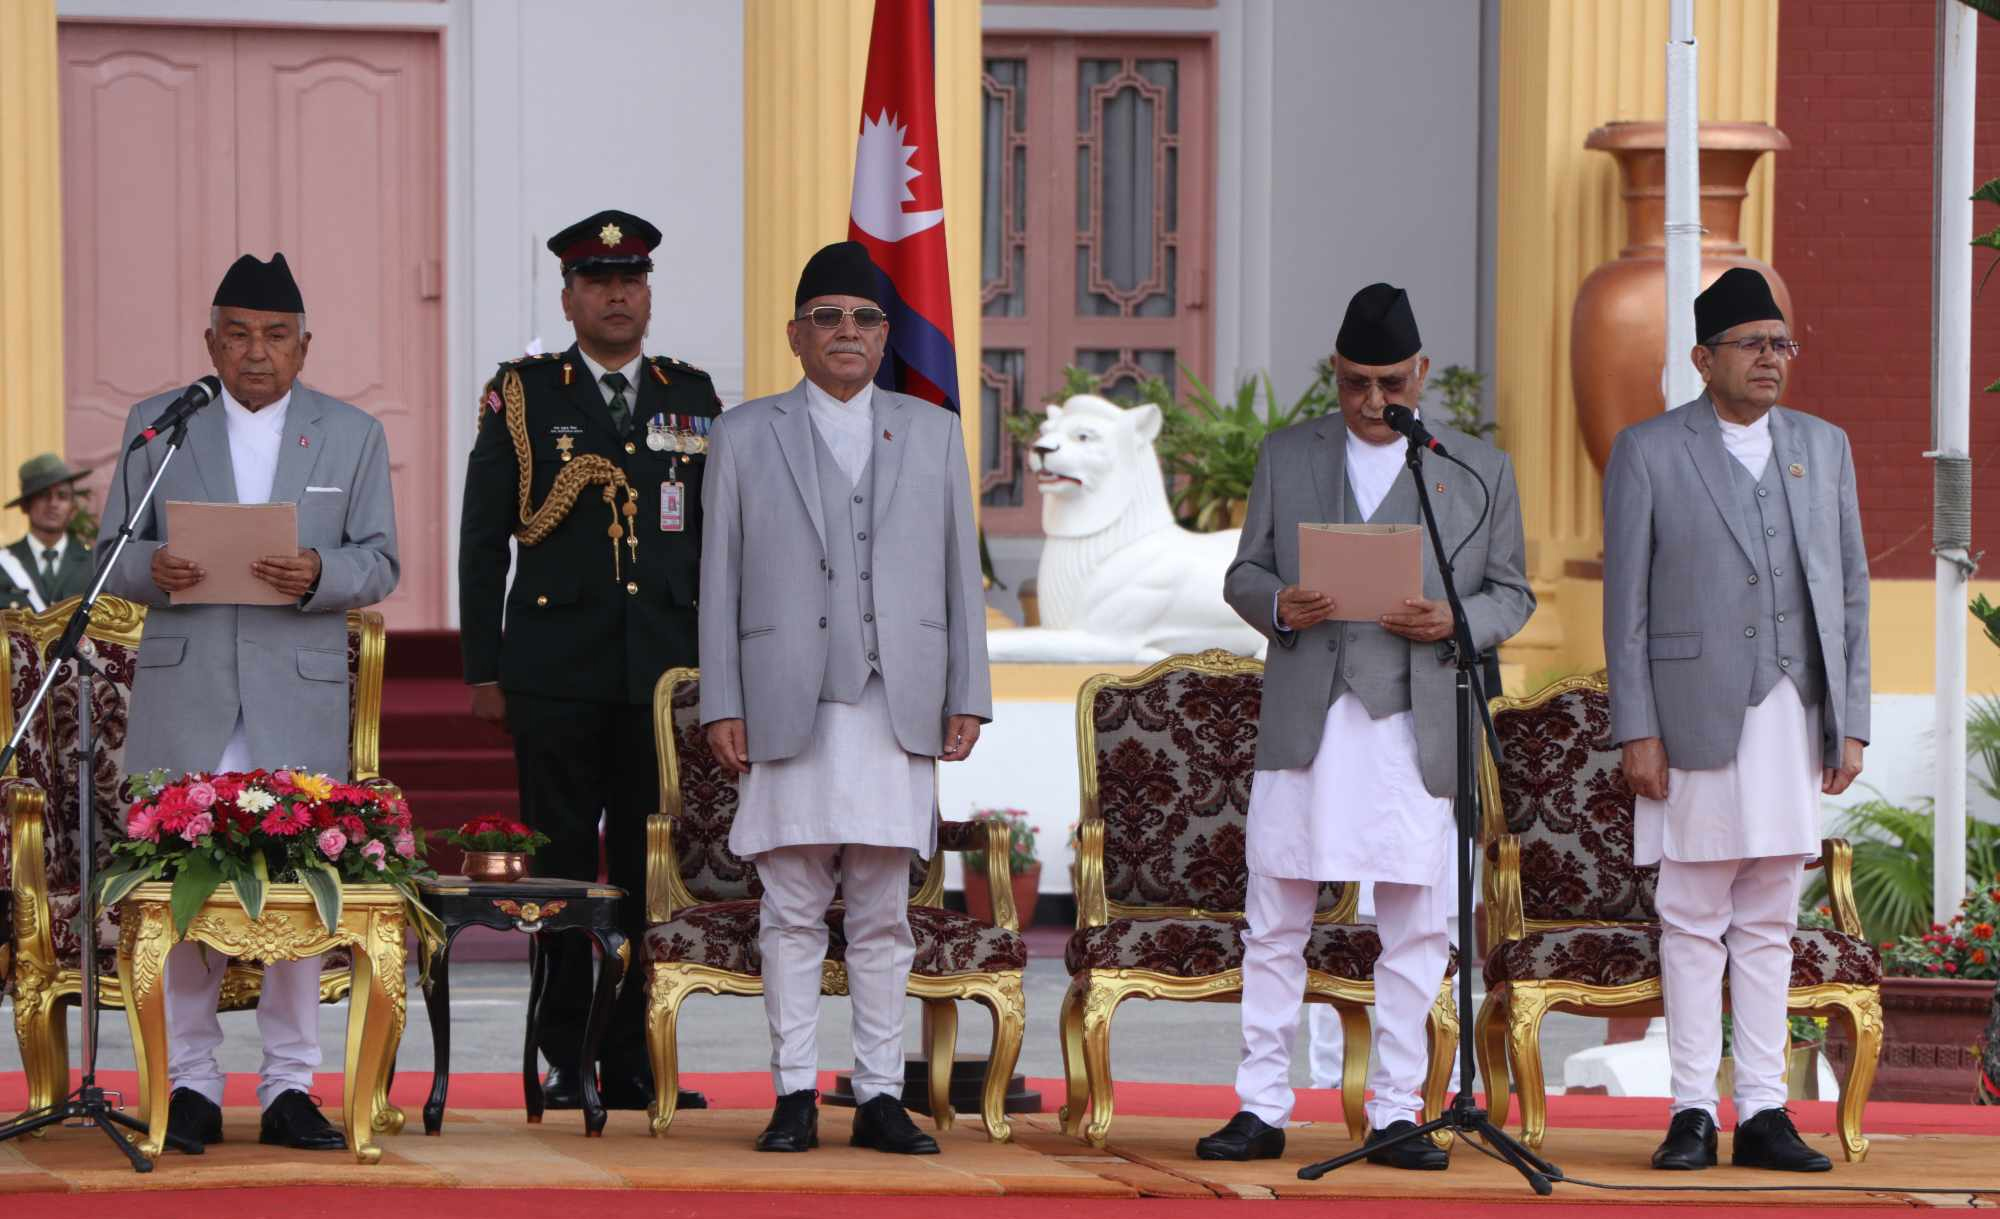 President administers oath to PM Oli and his team